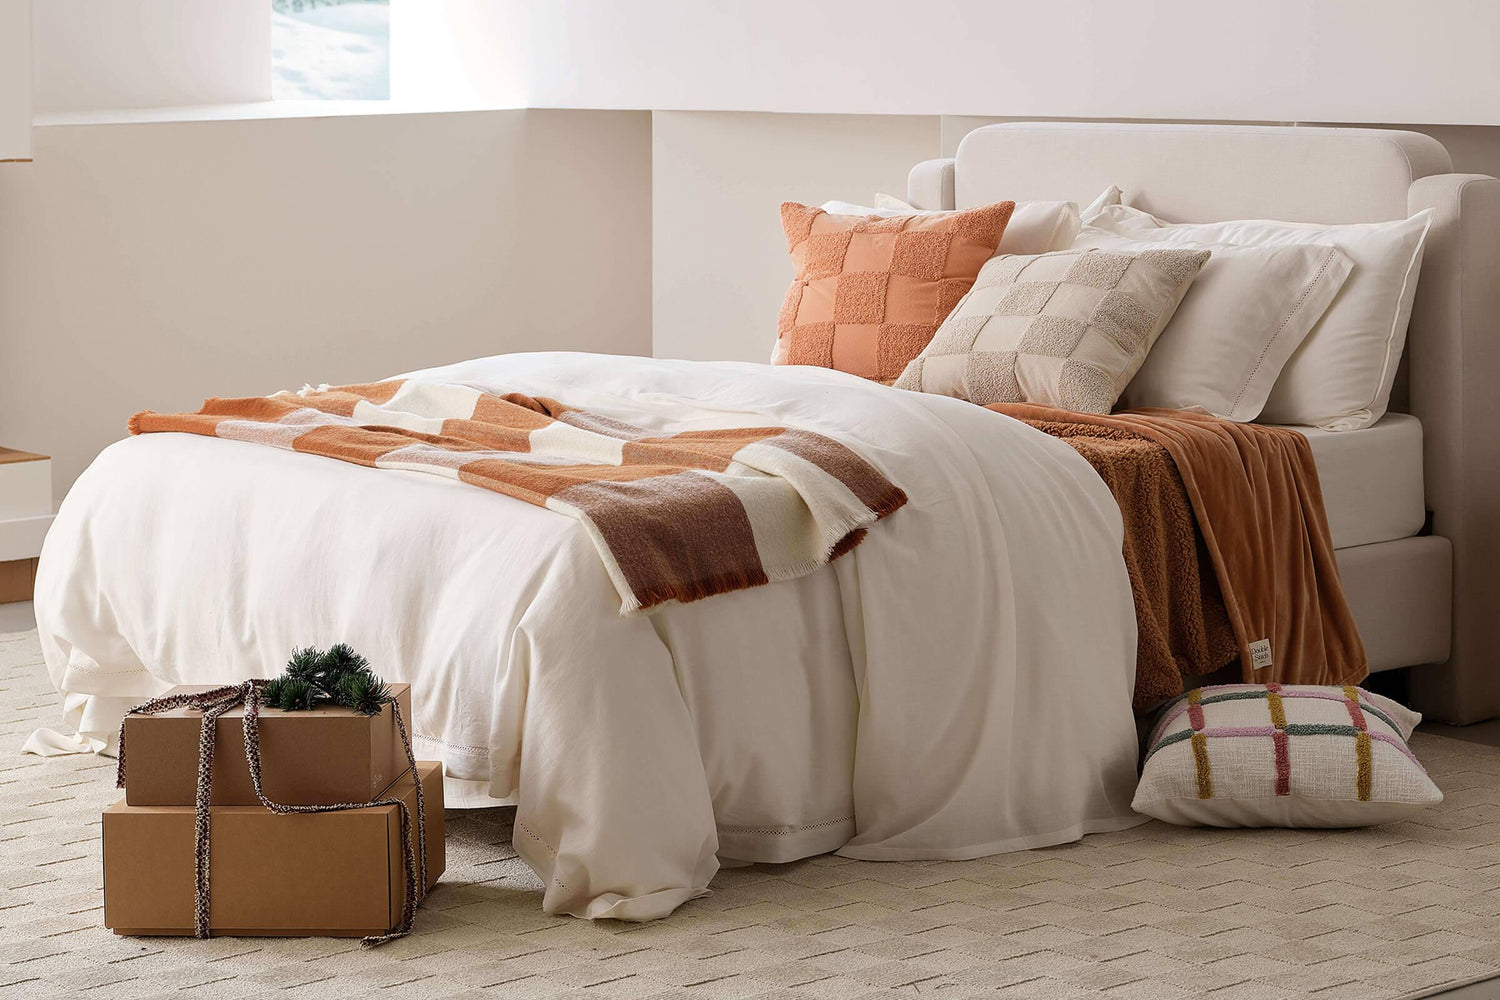 Weekend Idea: Decorate Your Bedroom For for the Holiday Season - Double Stitch By Bedsure